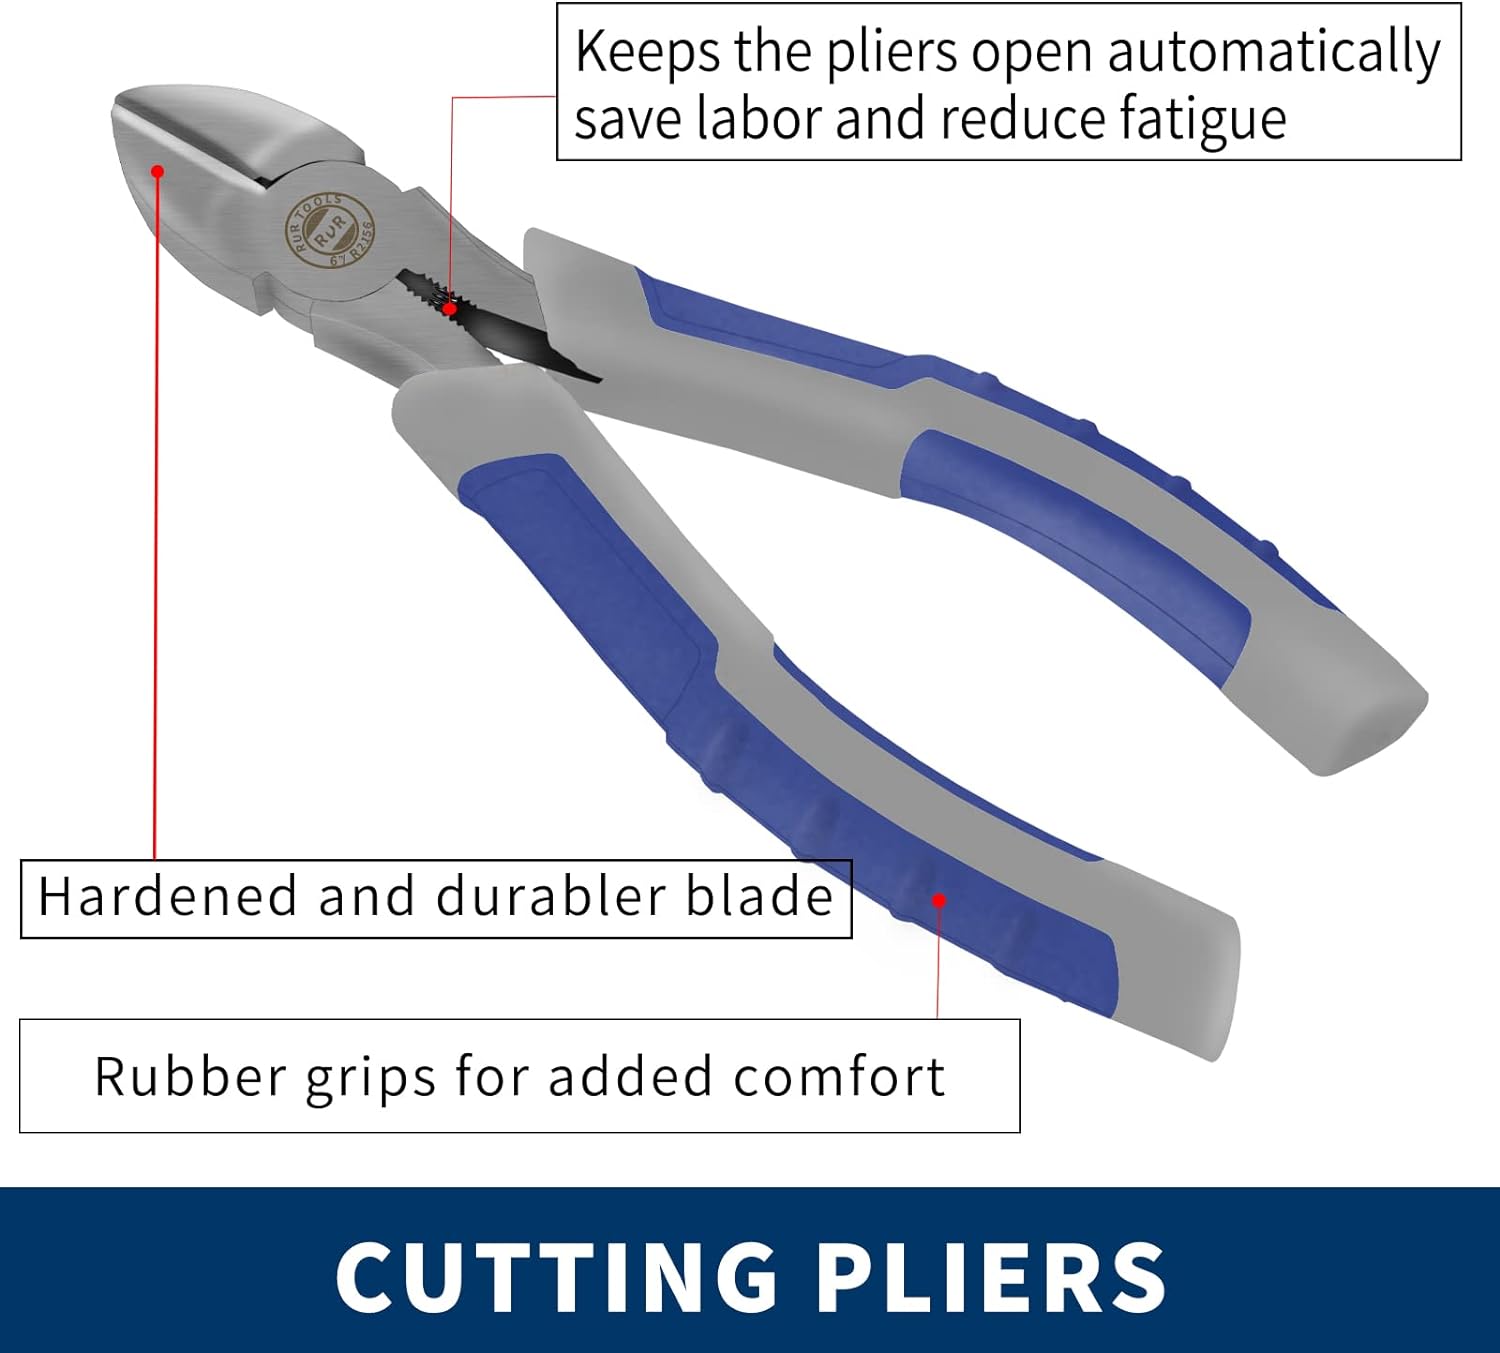 RUR Diagonal Cutting Pliers, 6 Inch,Super Sharp Wire Cutters, Side Cutters Pliers, Ideal For Precision Cutting Steel Wire